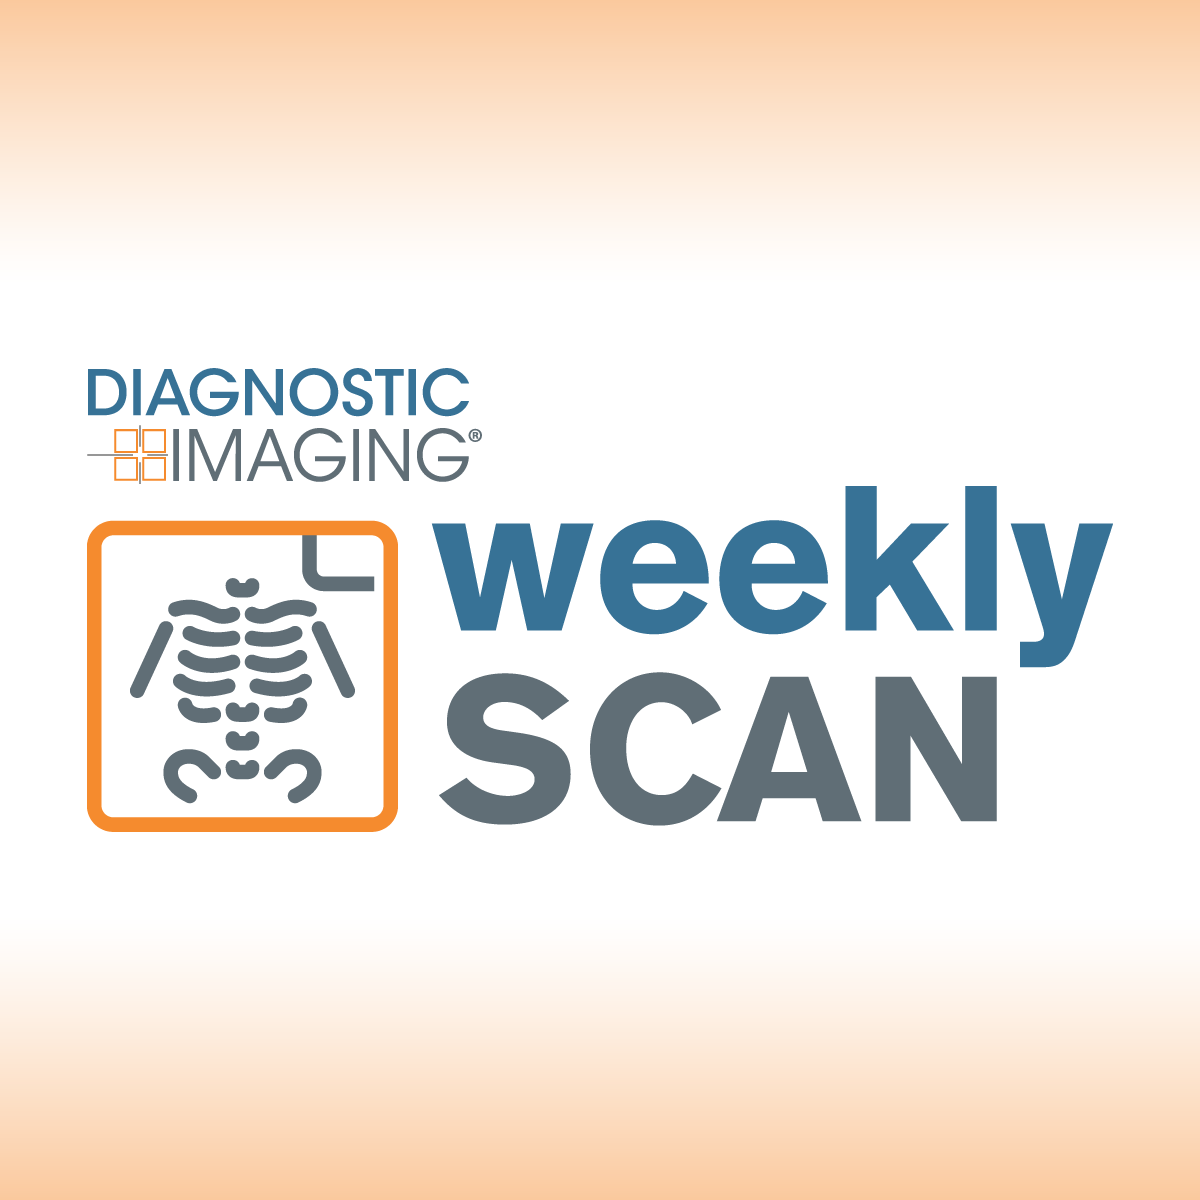 Diagnostic Imaging's Weekly Scan: February 11-February 17